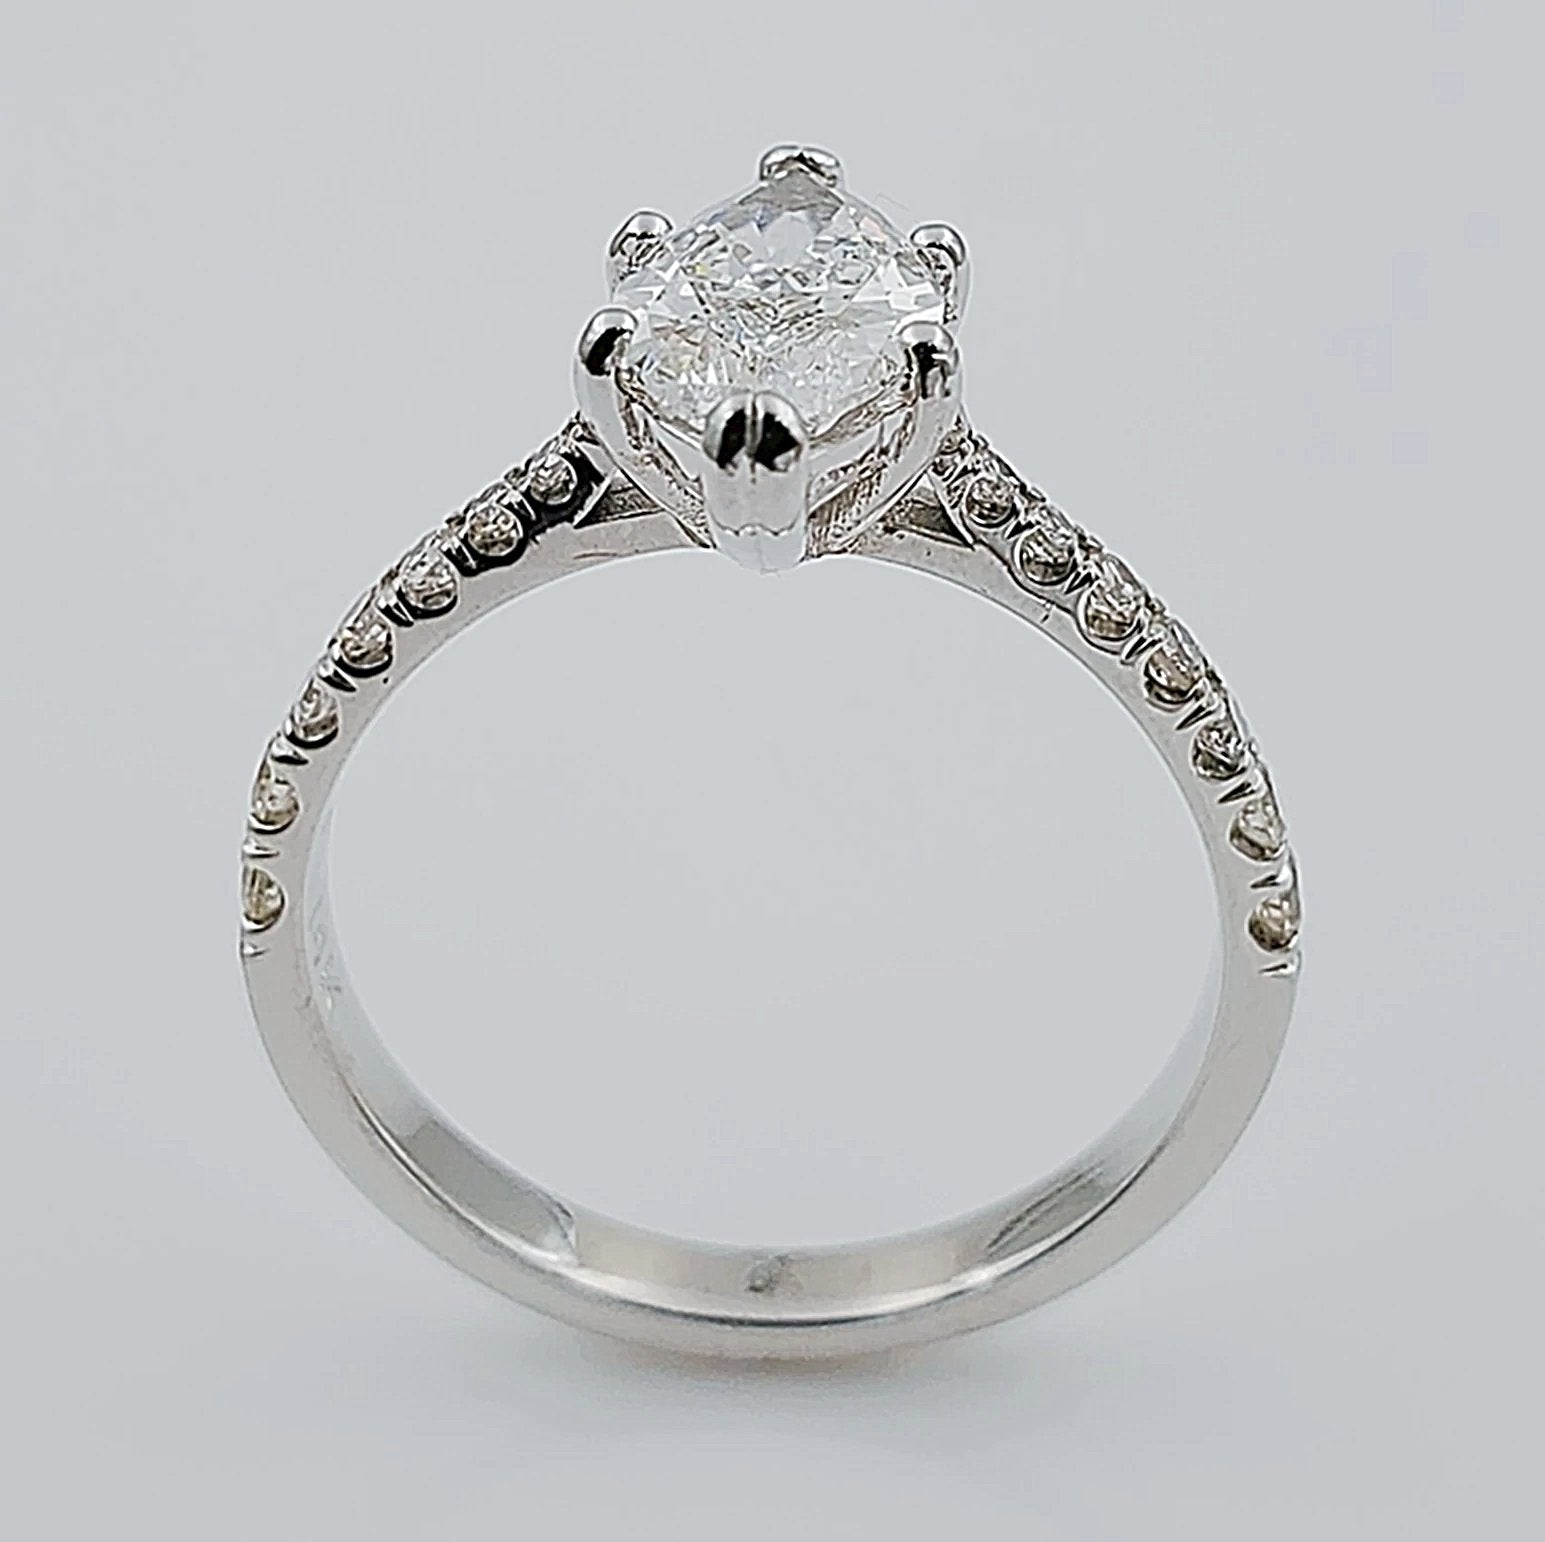 Women's 14K White Gold with 1.12 CT Marquis Center Diamond (I1 Color I) 2.9 GR Total Weight Wedding Ring. (Size: 6.25)